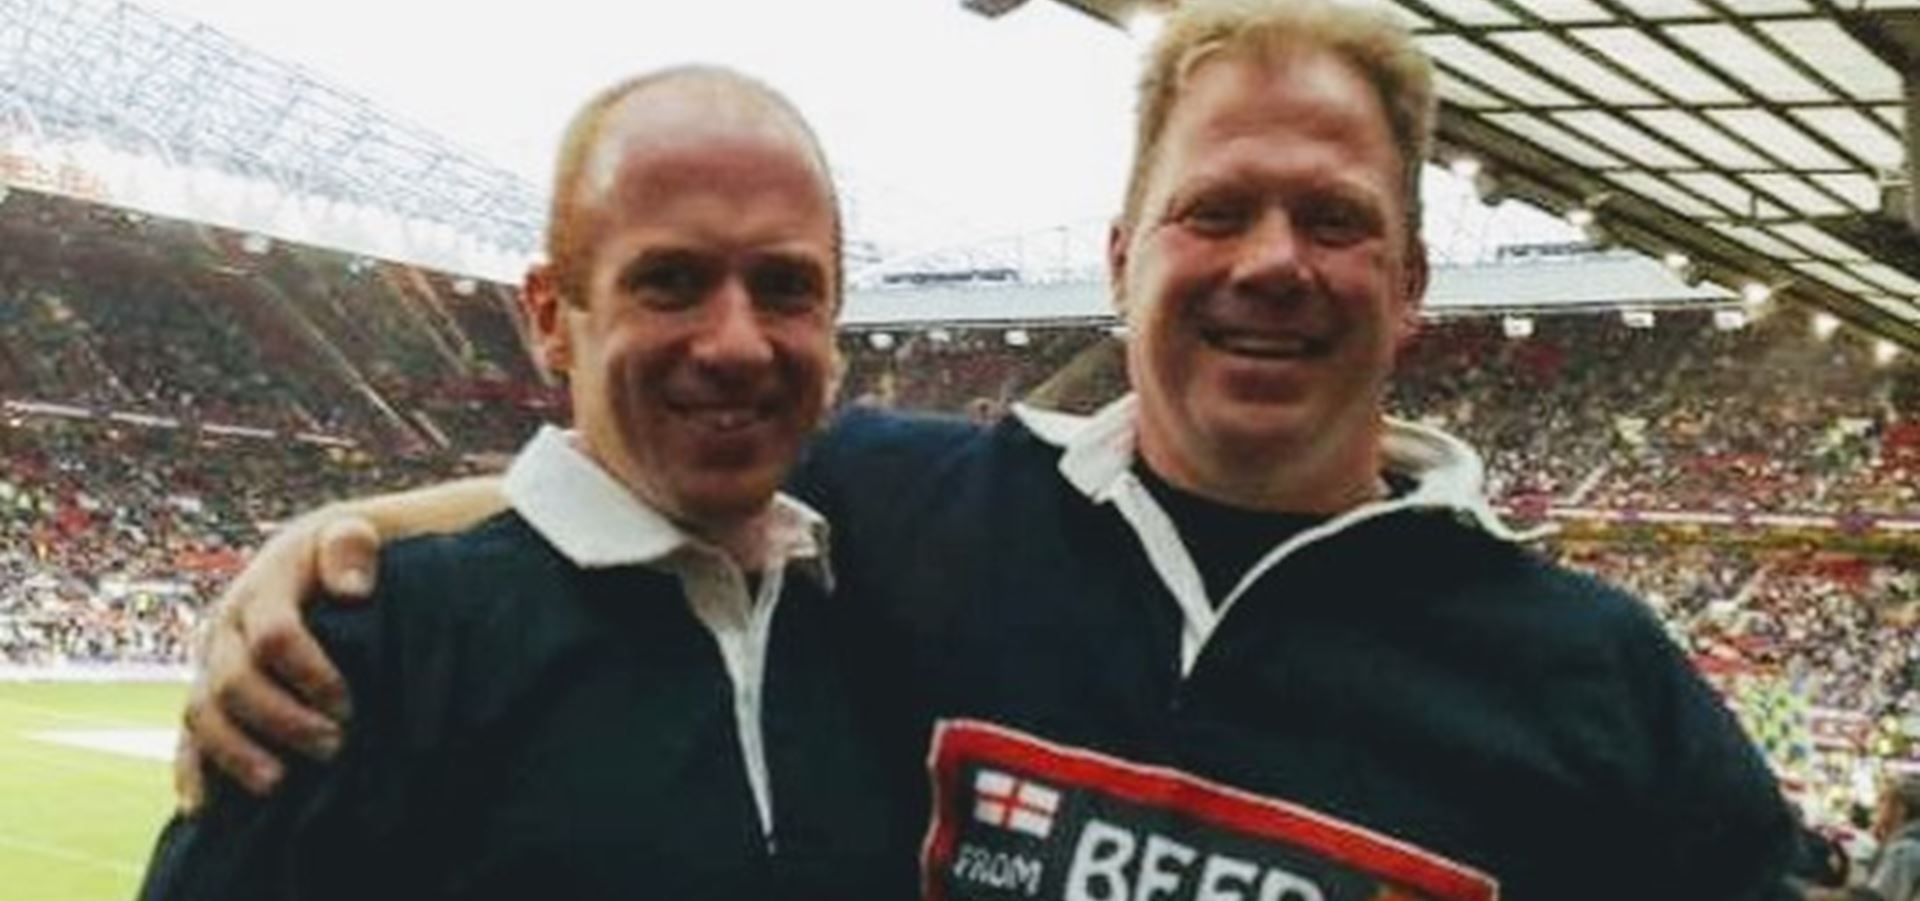 Richard and his brother Tim at a rugby match